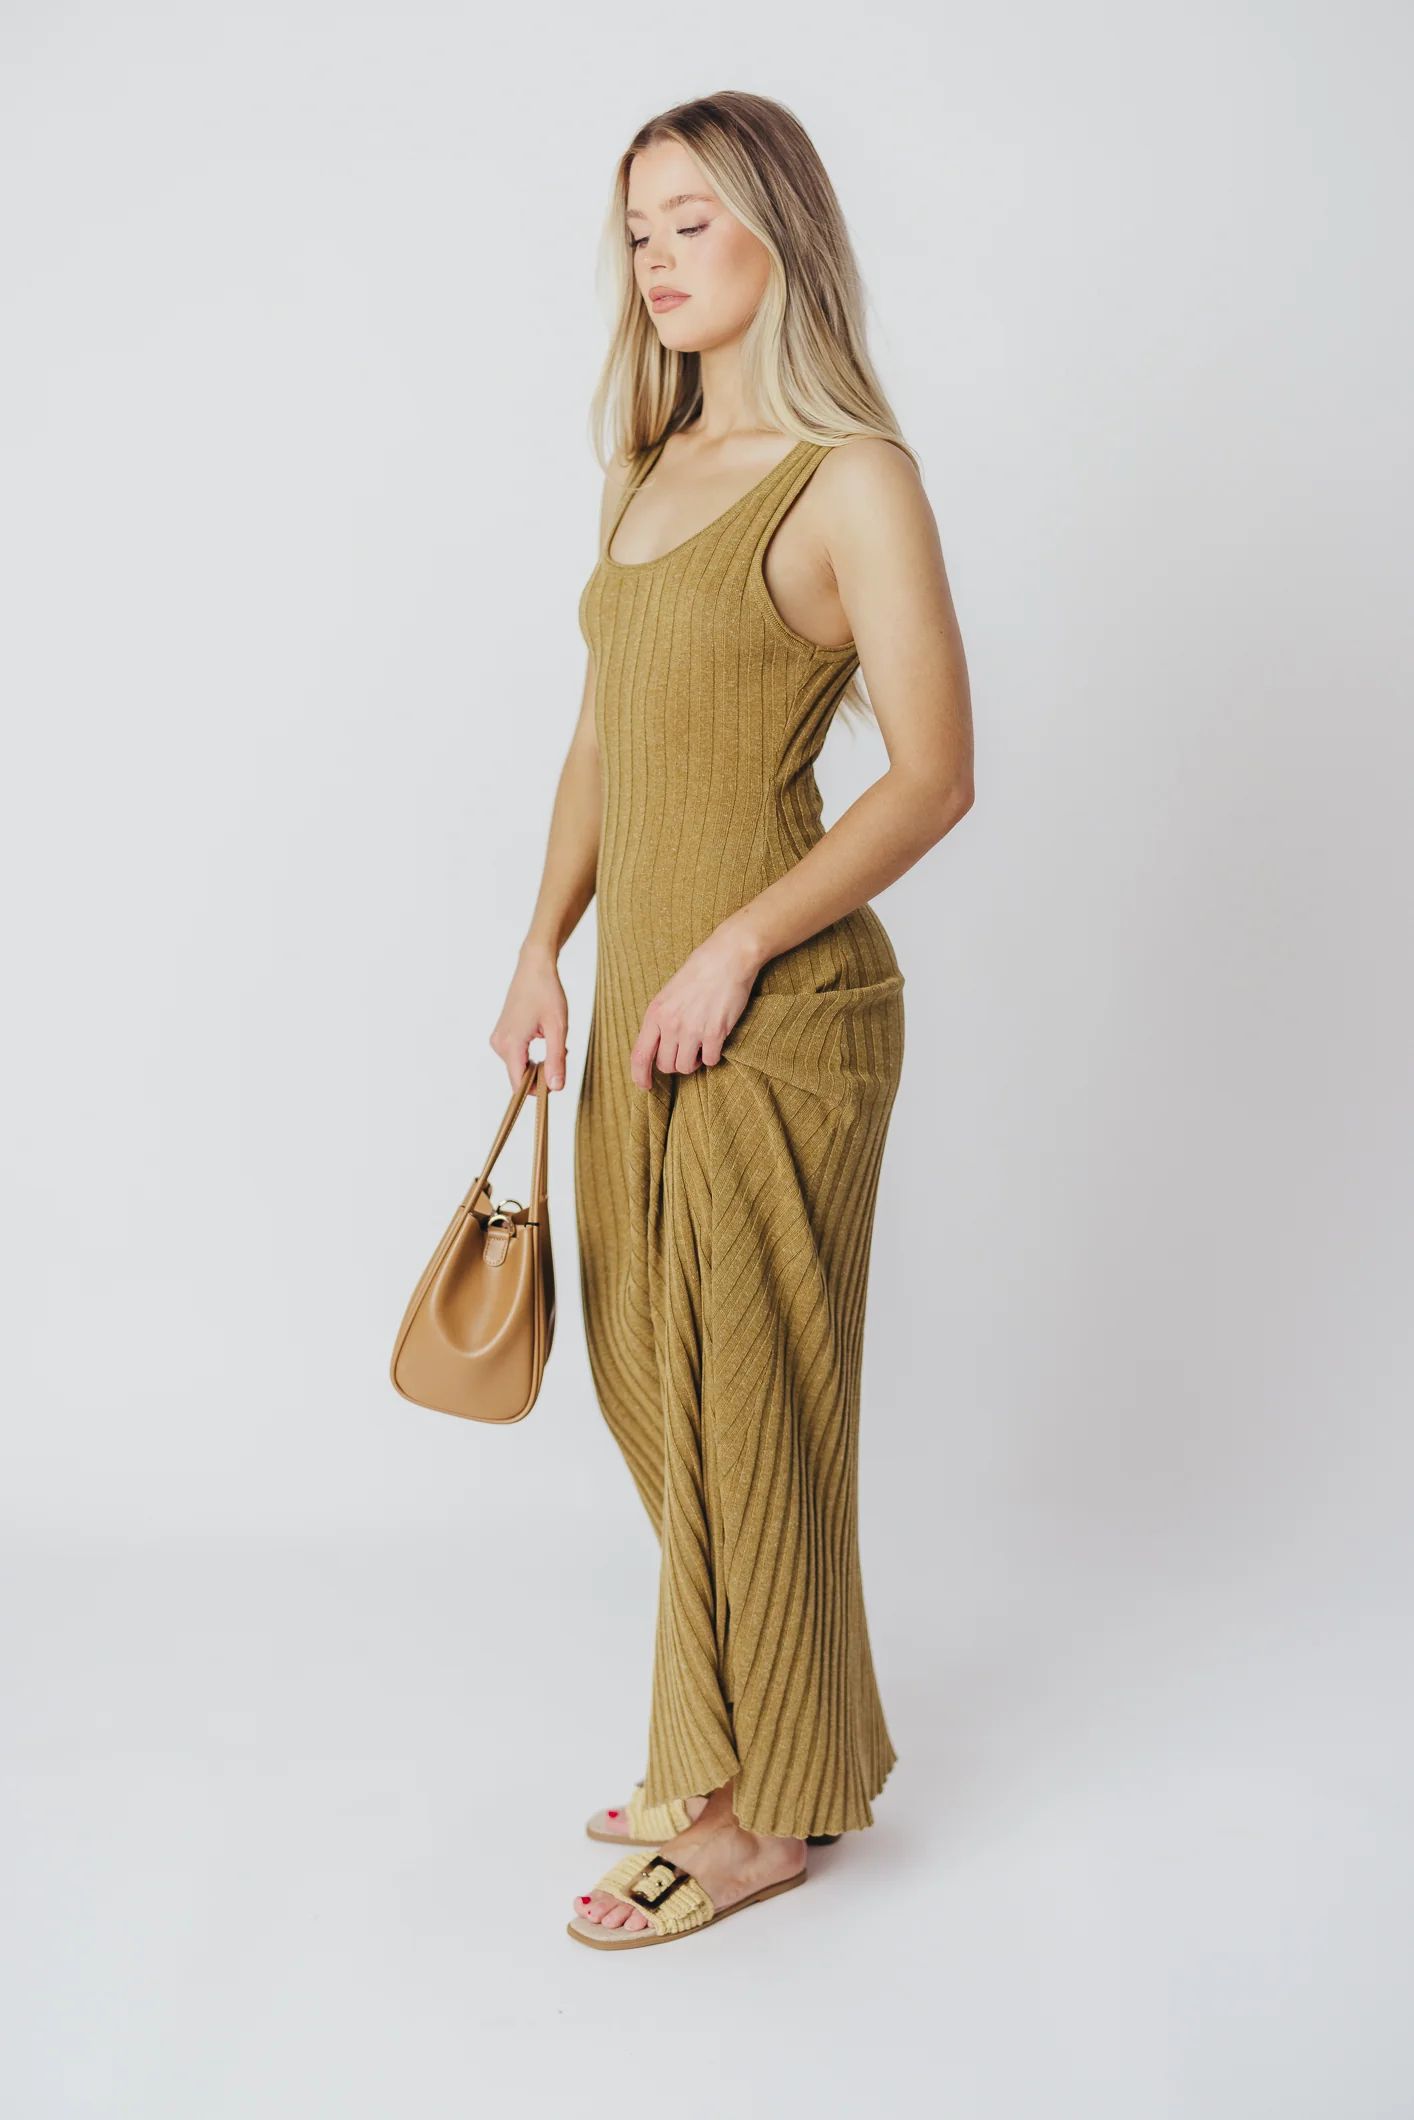 Gidea Knit Maxi Dress in Brown Olive | Worth Collective